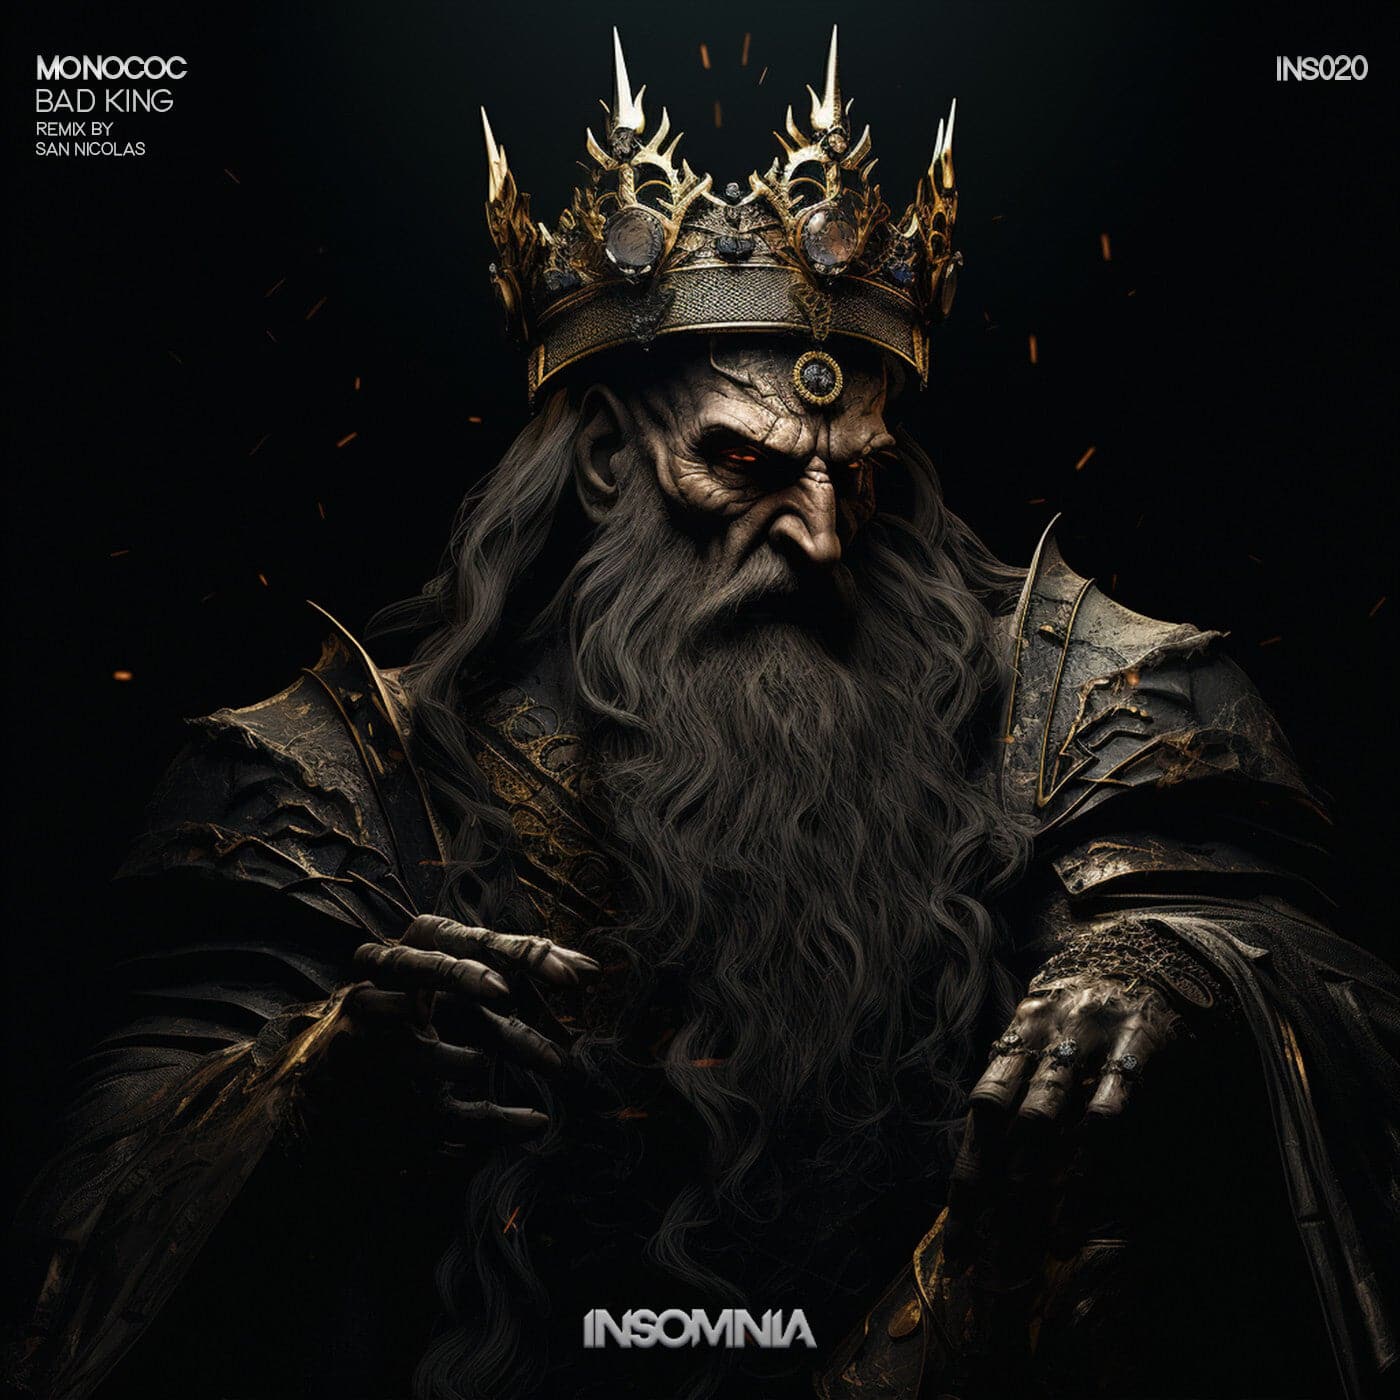 image cover: Monococ - Bad King on INSOMNIA